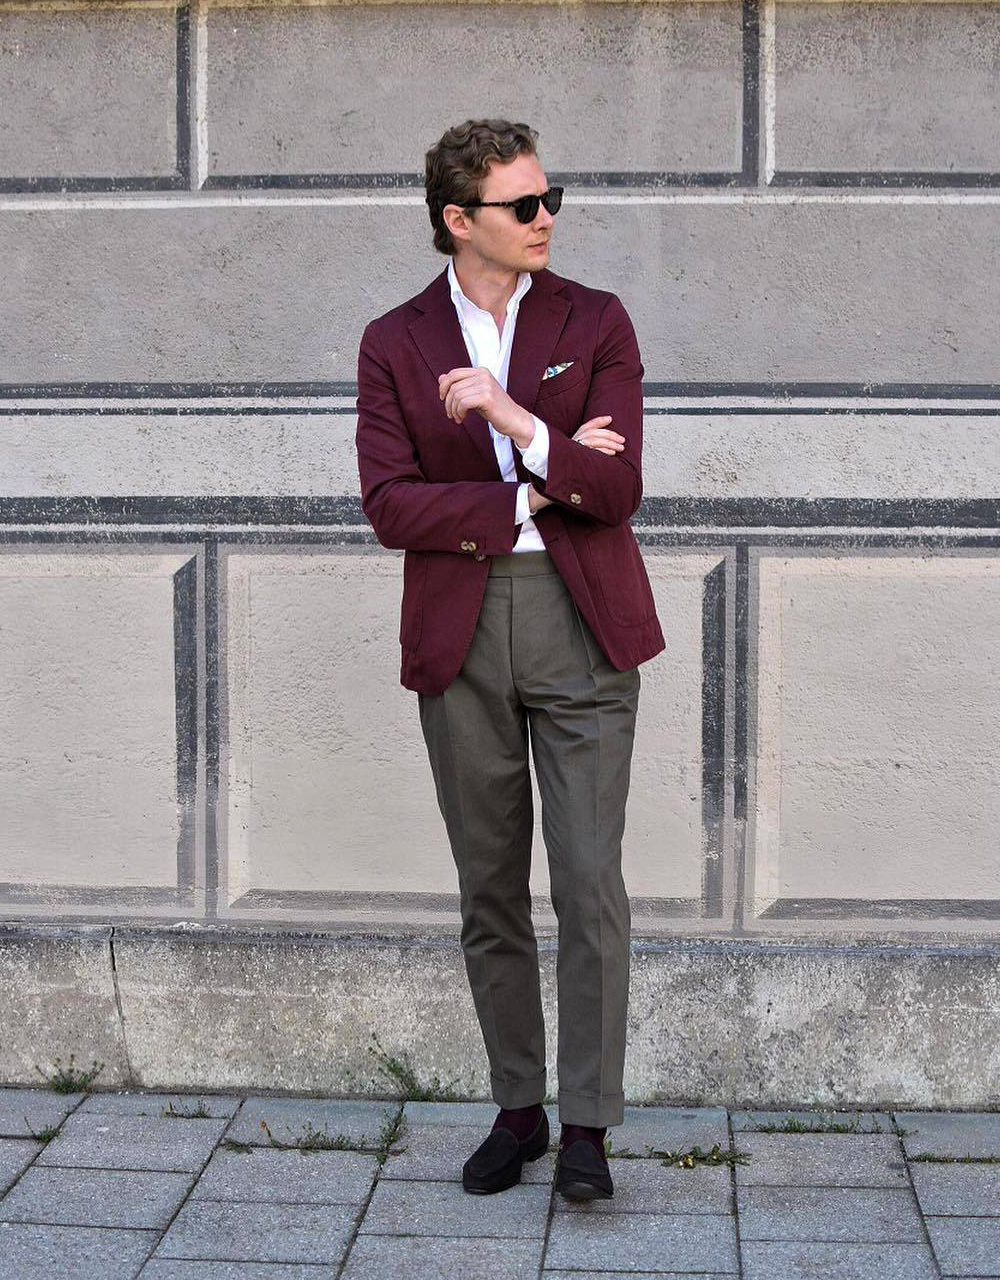 Burgundy blazer, white shirt, grey trousers, and black loafers